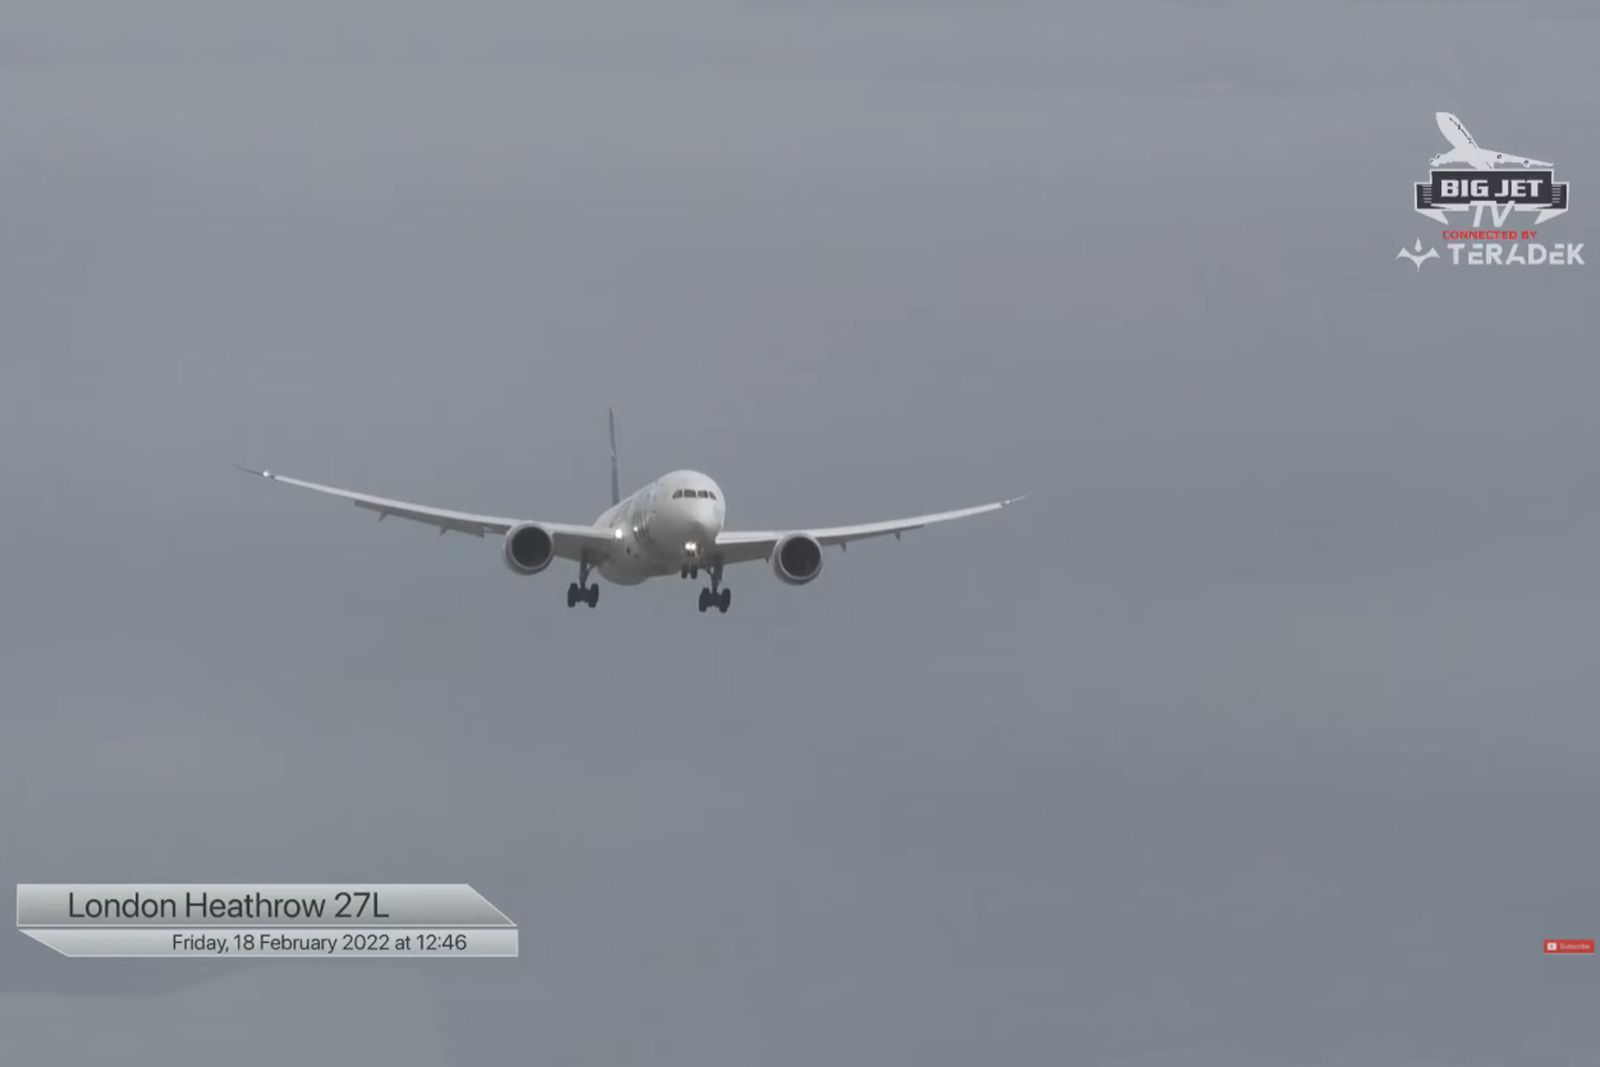 Stop what you're doing and watch Big Jet TV's live coverage from Heathrow instead photo 1